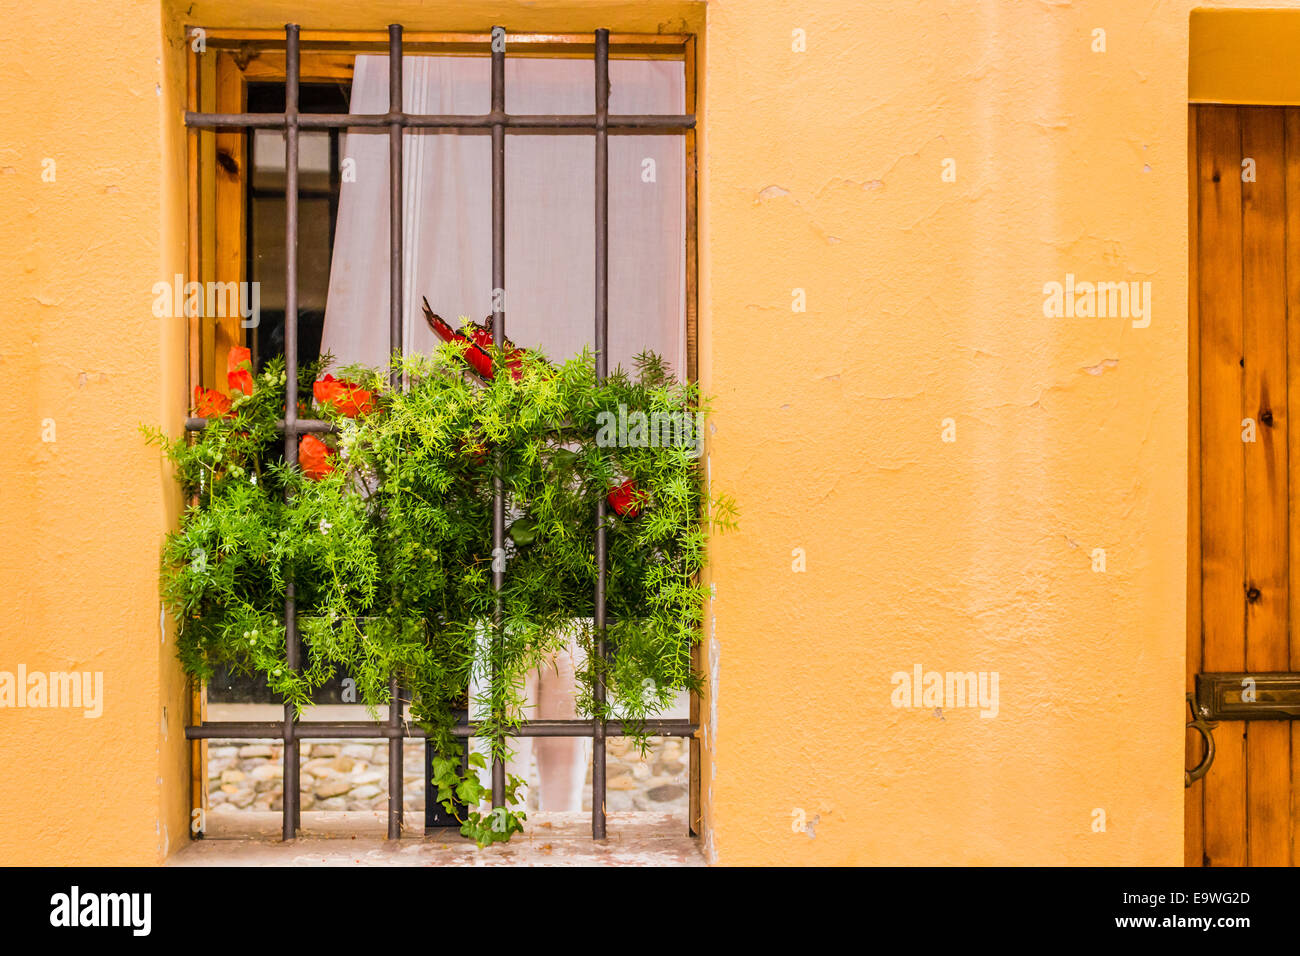 A window on yellow painted wall fenced by grey iron grating: white vase with fake plastic green weeds and red poppy hanging down Stock Photo